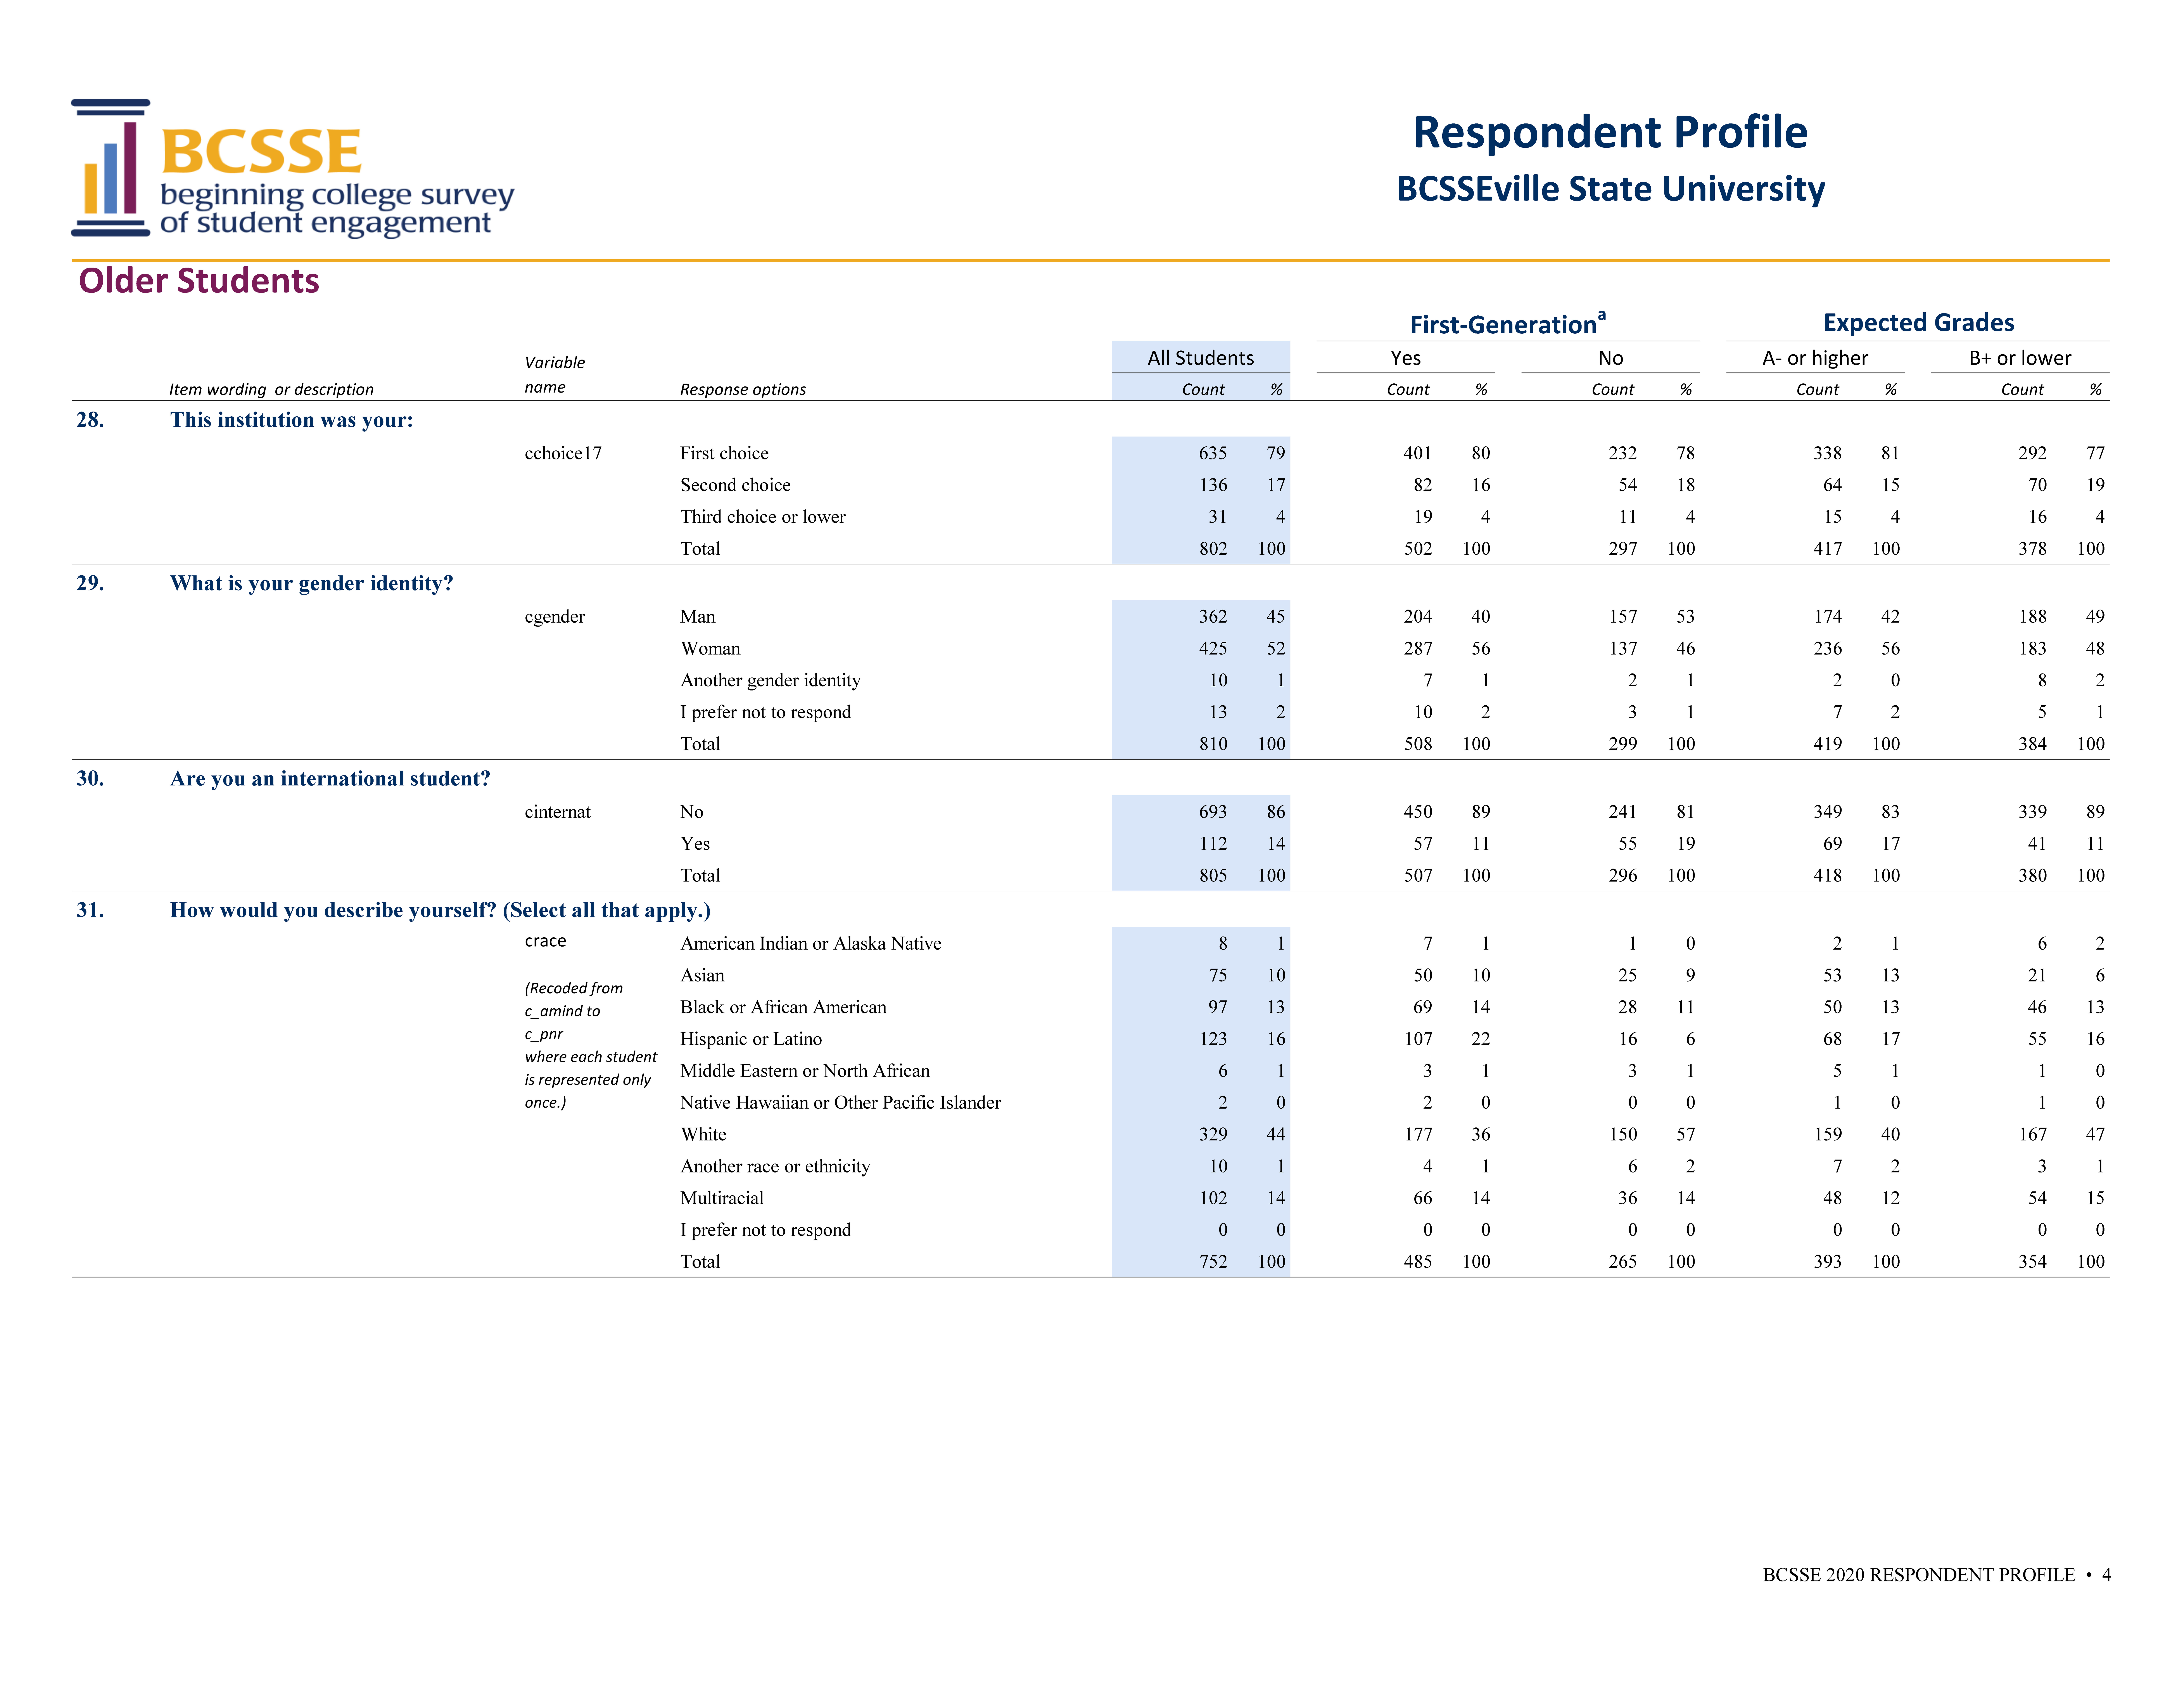 BCSSE Institutional Report example for Older students.